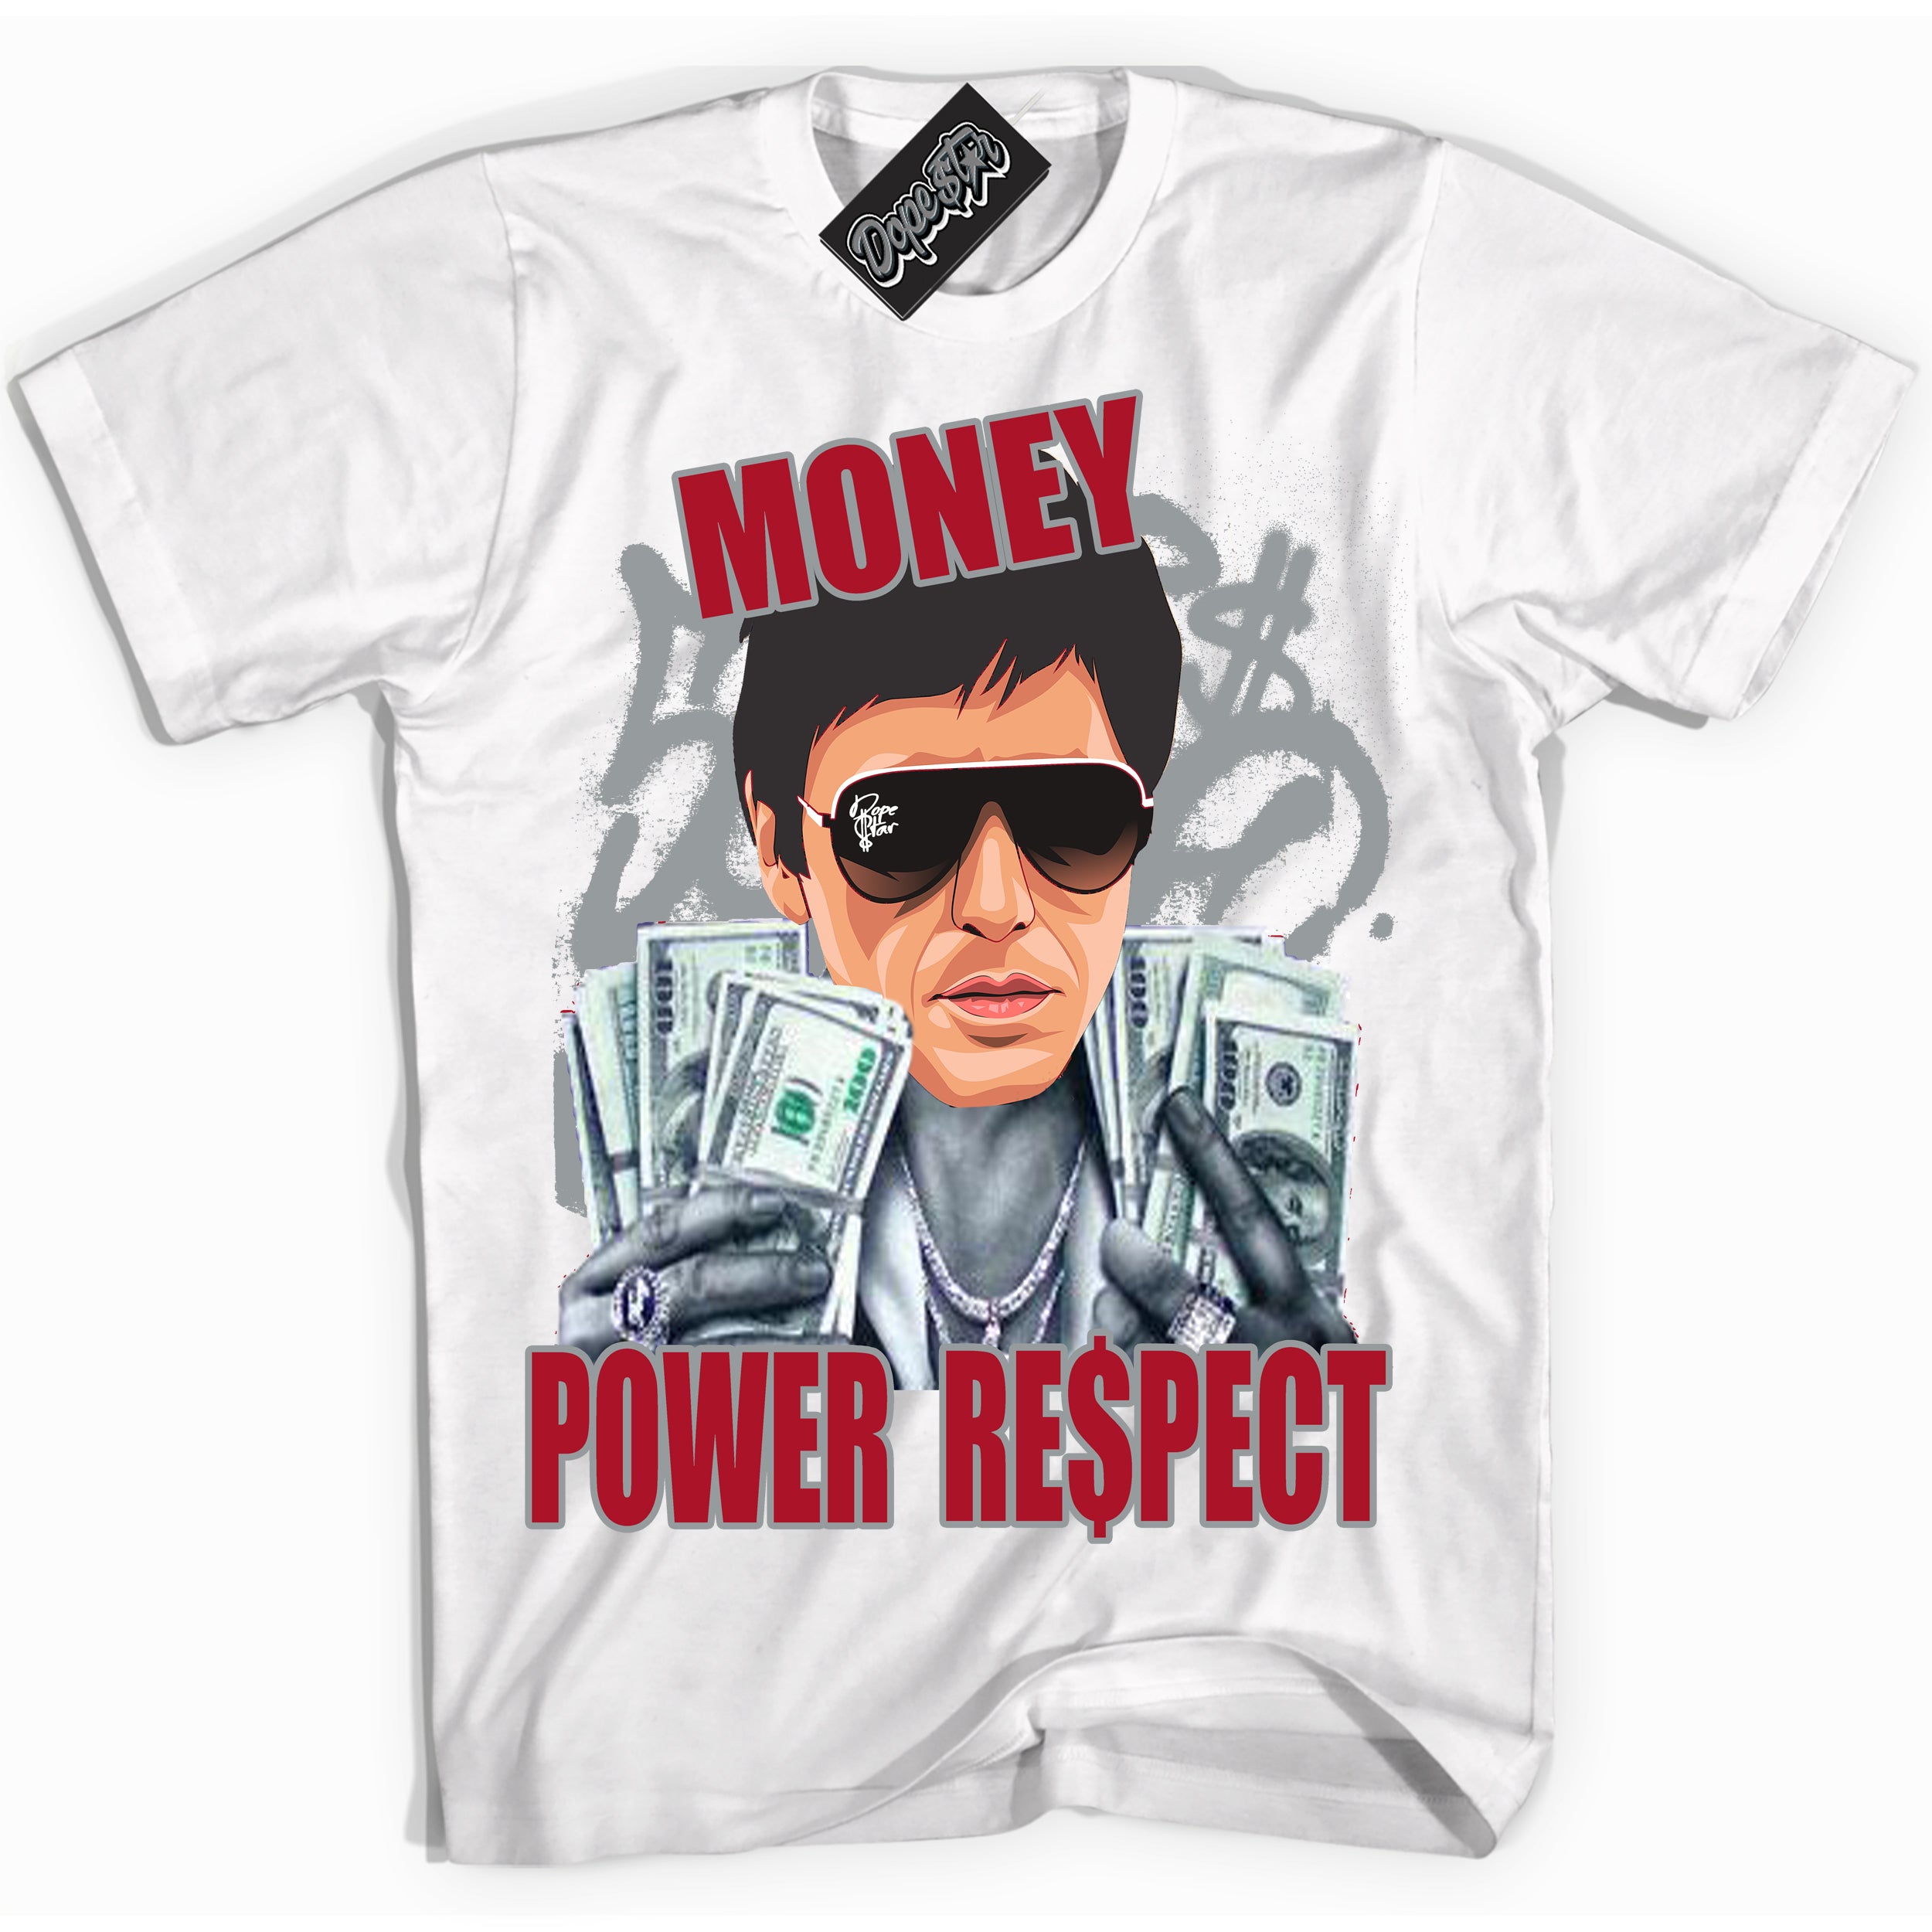 Cool White Shirt with “ Tony Montana ” design that perfectly matches Reverse Ultraman Sneakers.